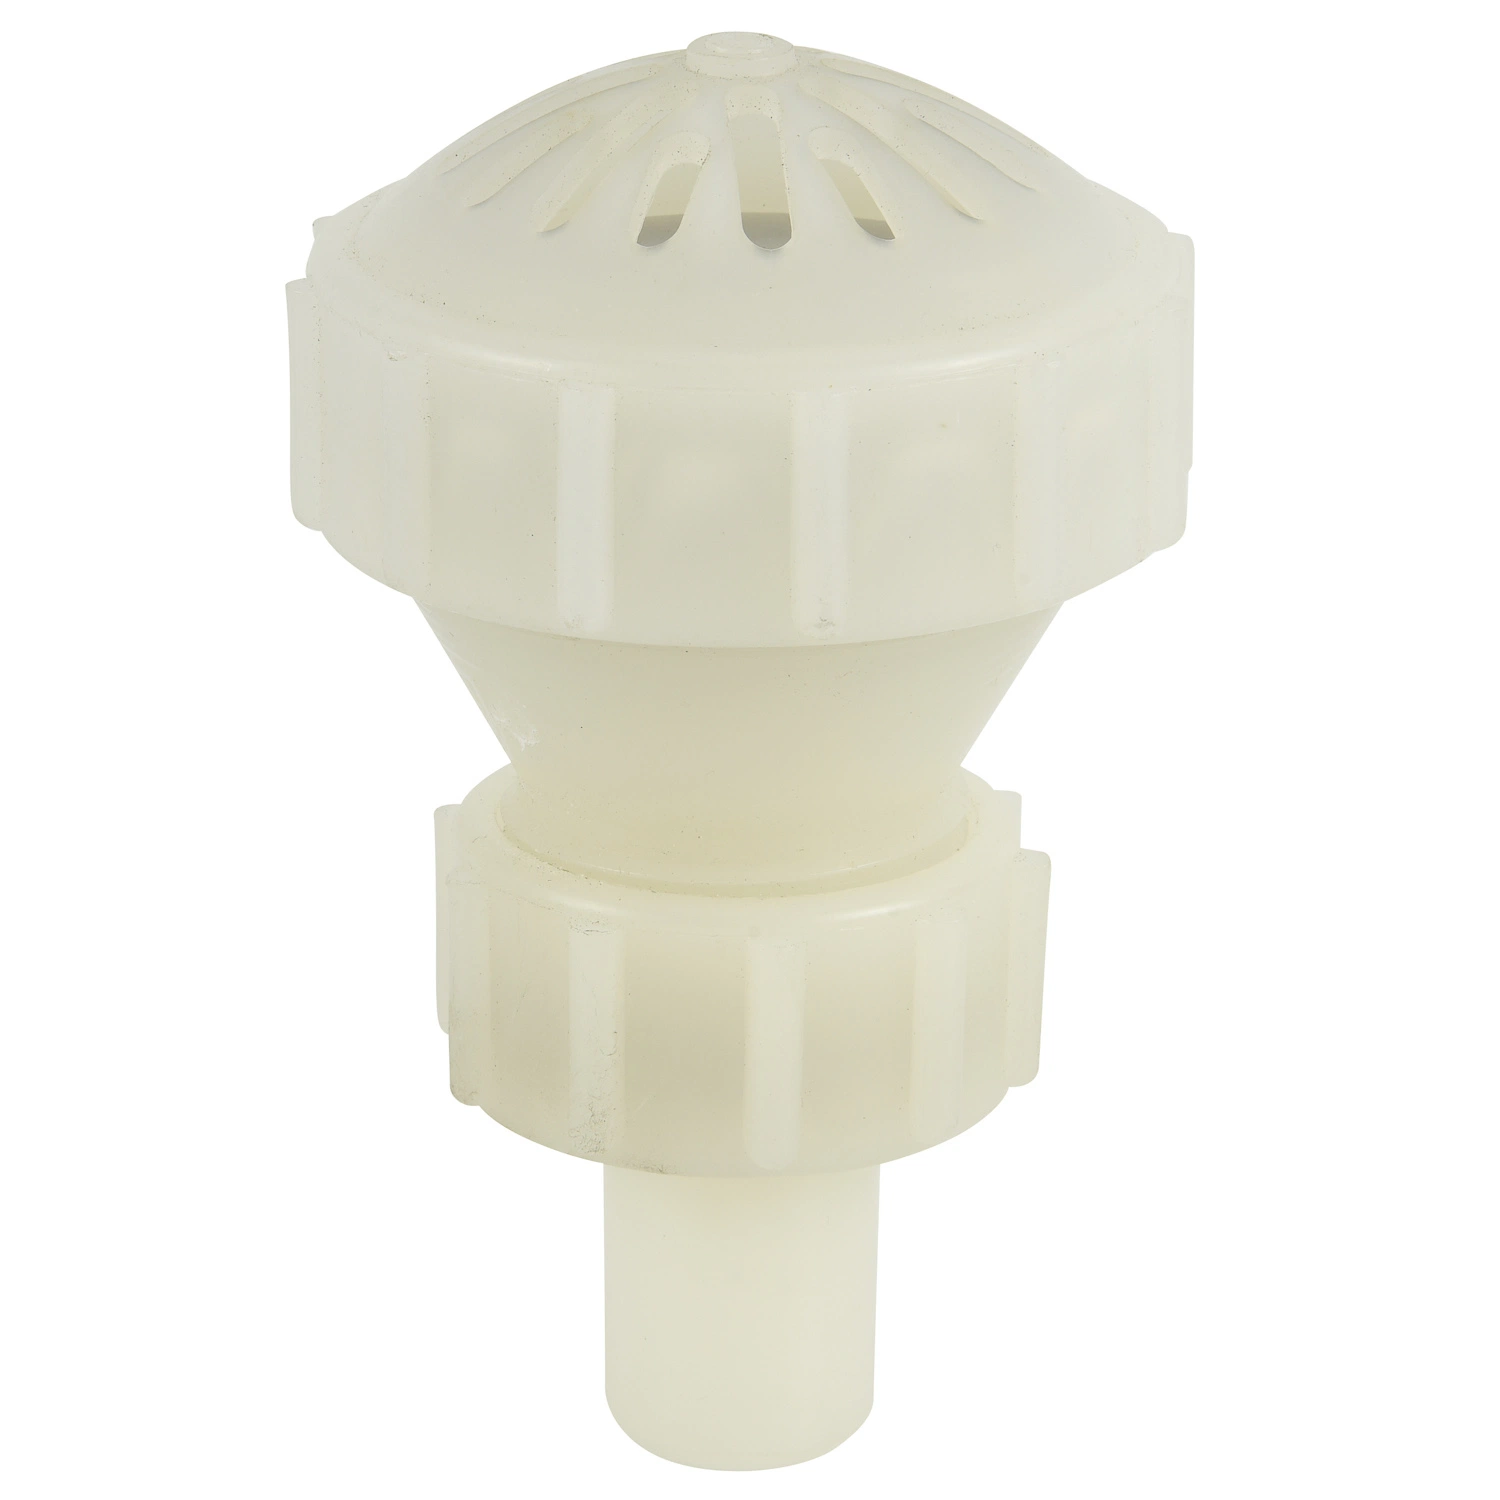 JIS DIN ANSI Cns PVDF Plastic Foot Valve for Chemical Industry